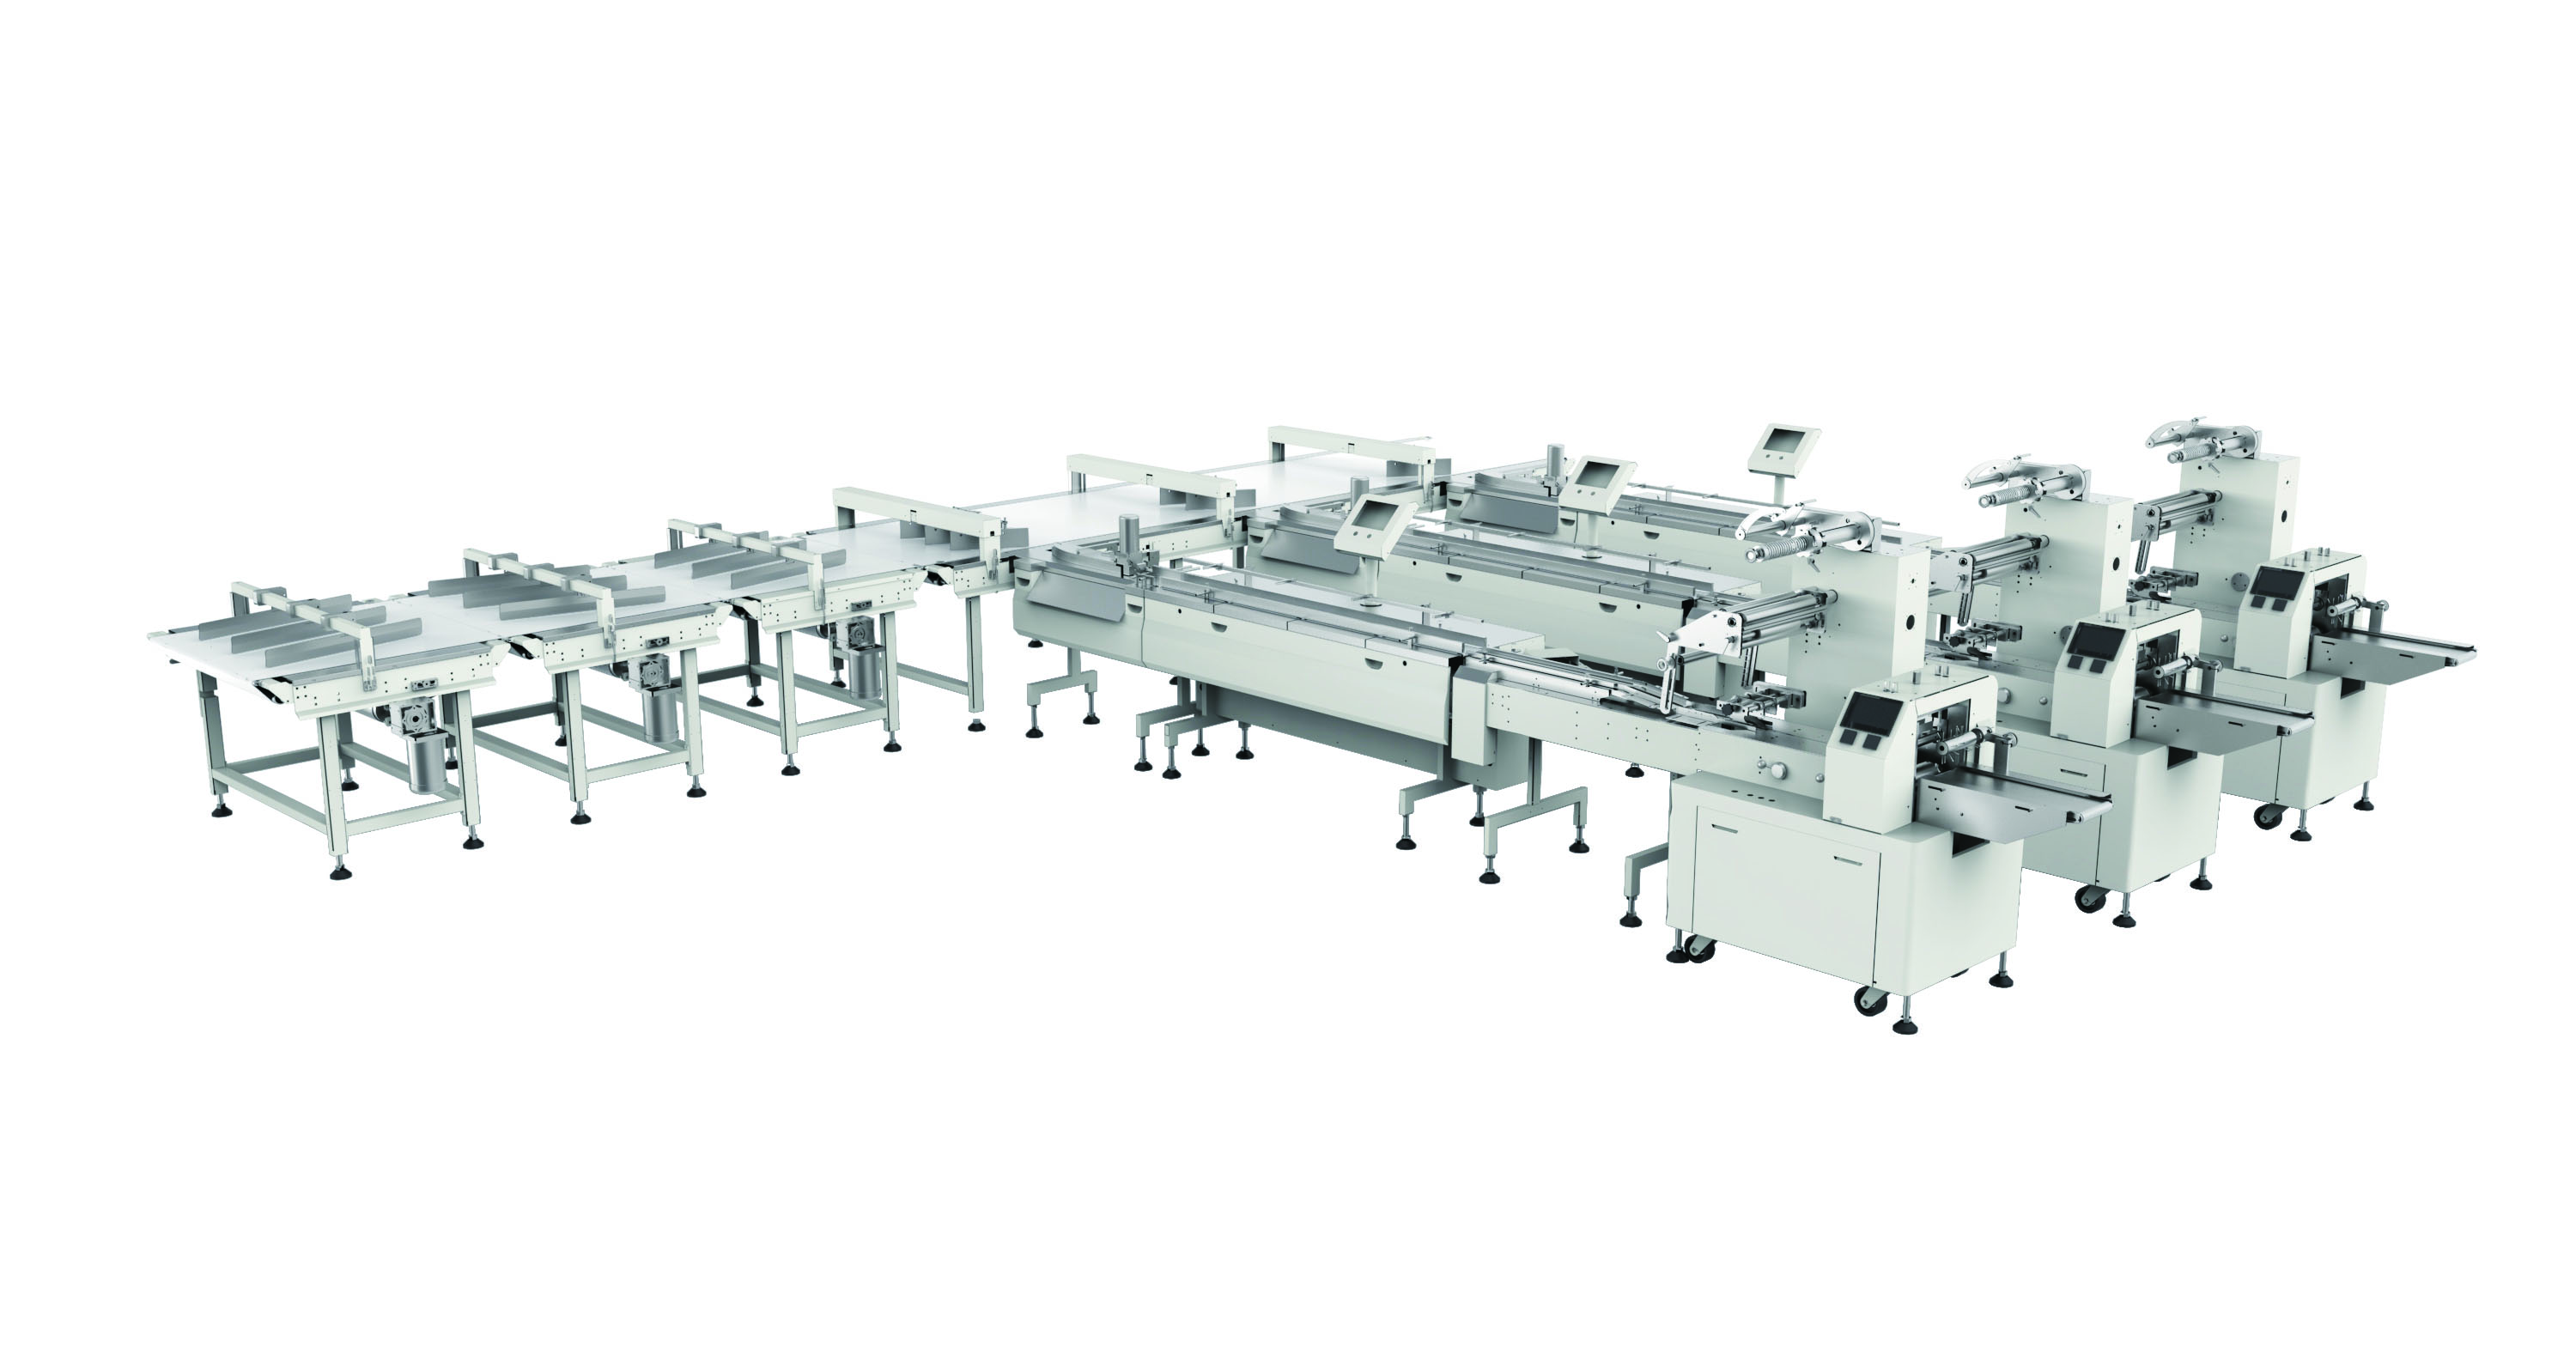 Operational purpose and function of auto tray dispenser